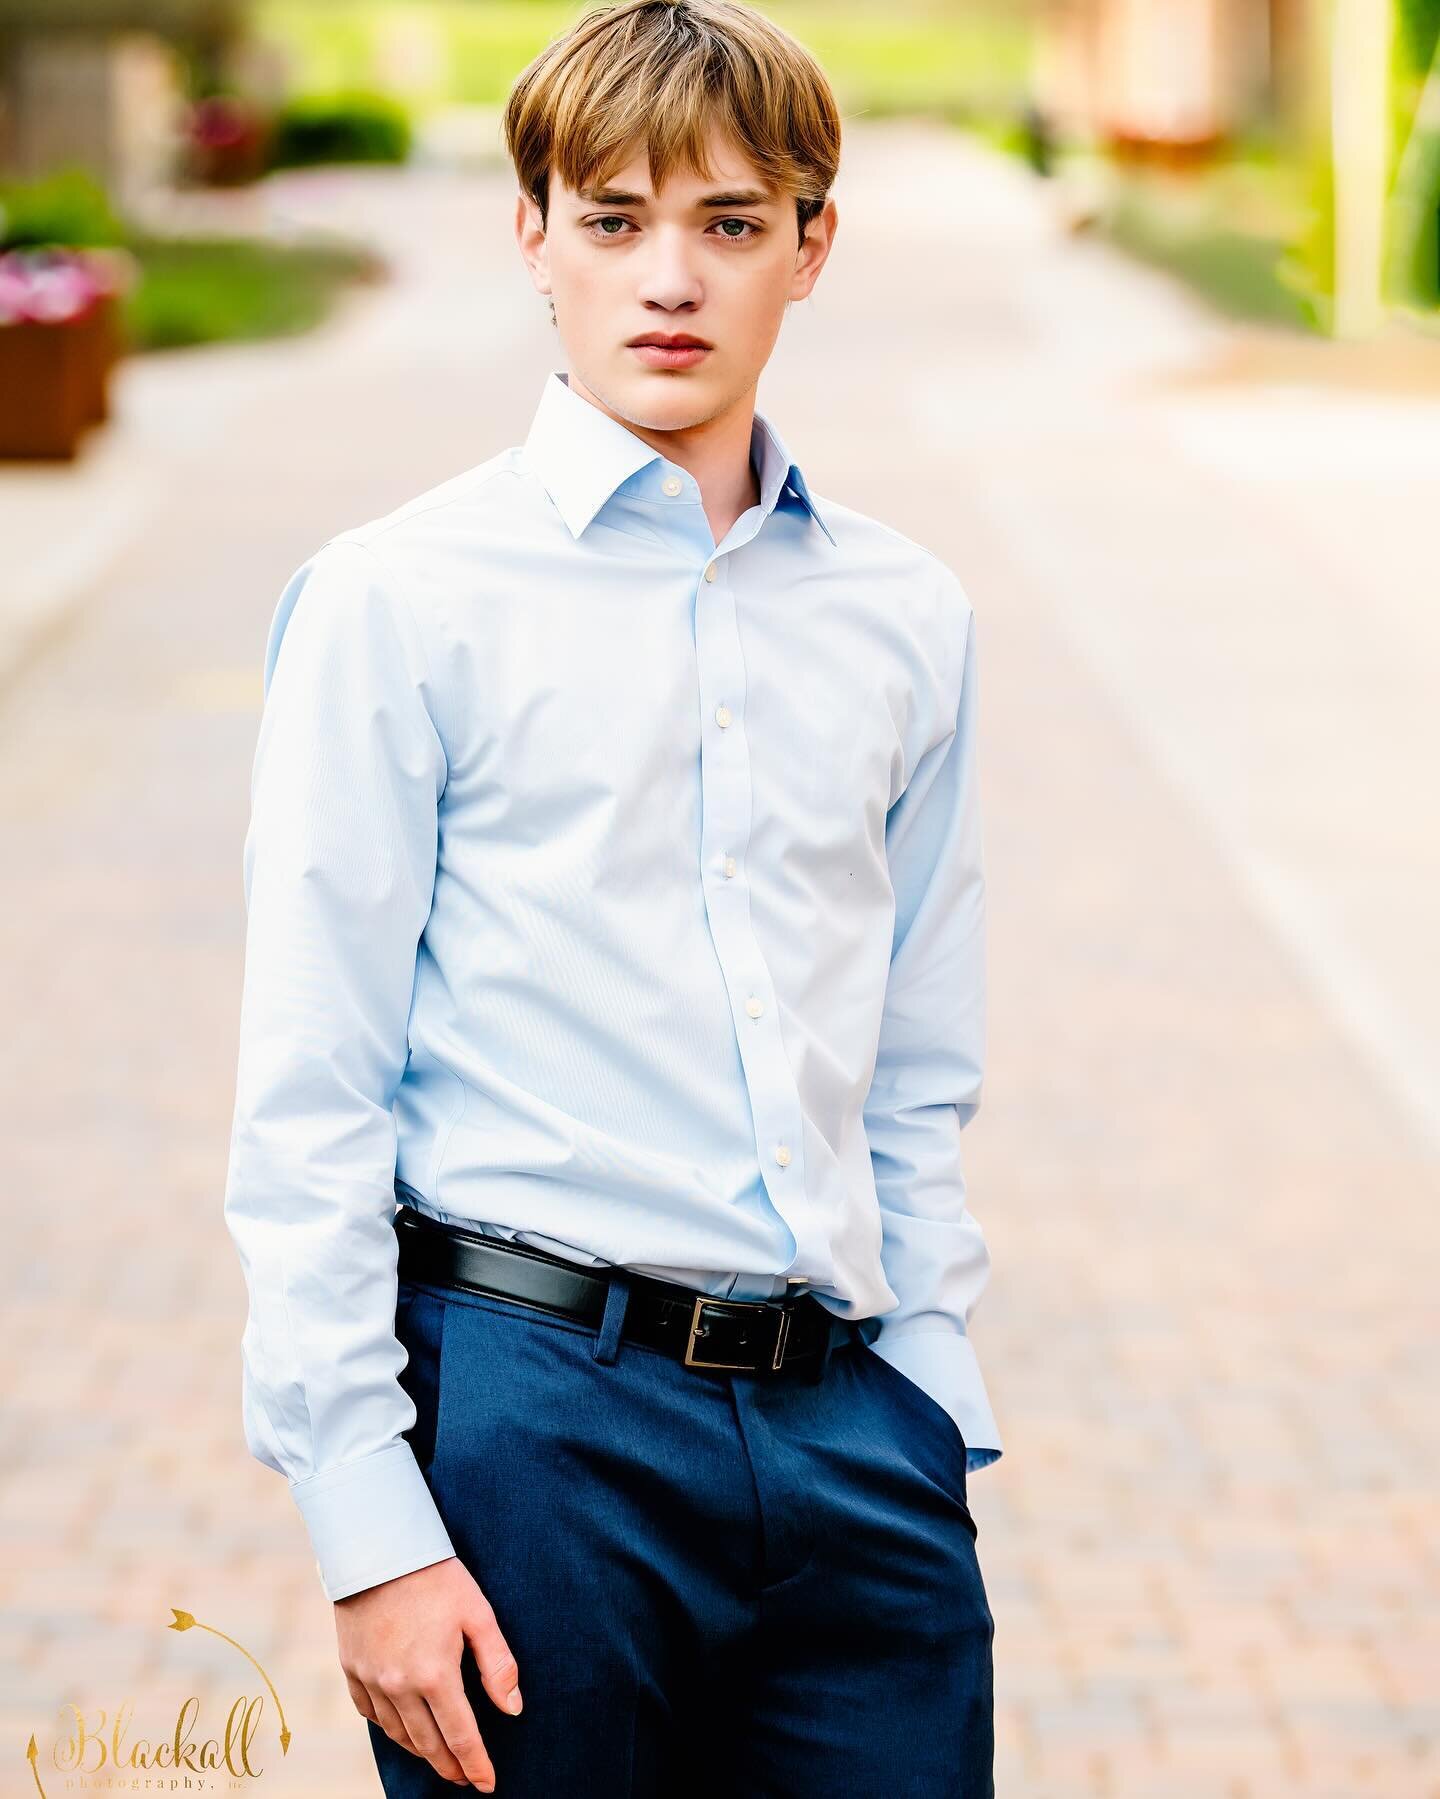 A little on the serious side! 😏
Class of 2024🎓
&zwnj;
Also, is it just me or does this remind you of a certain sultry but dreamy movie character?! 🧛&zwj;♂️
&zwnj;
&zwnj;
&copy;️Blackall Photography 2024
#BLACKALLPHOTOGRAPHY
#TexasThroughHerLens
#N